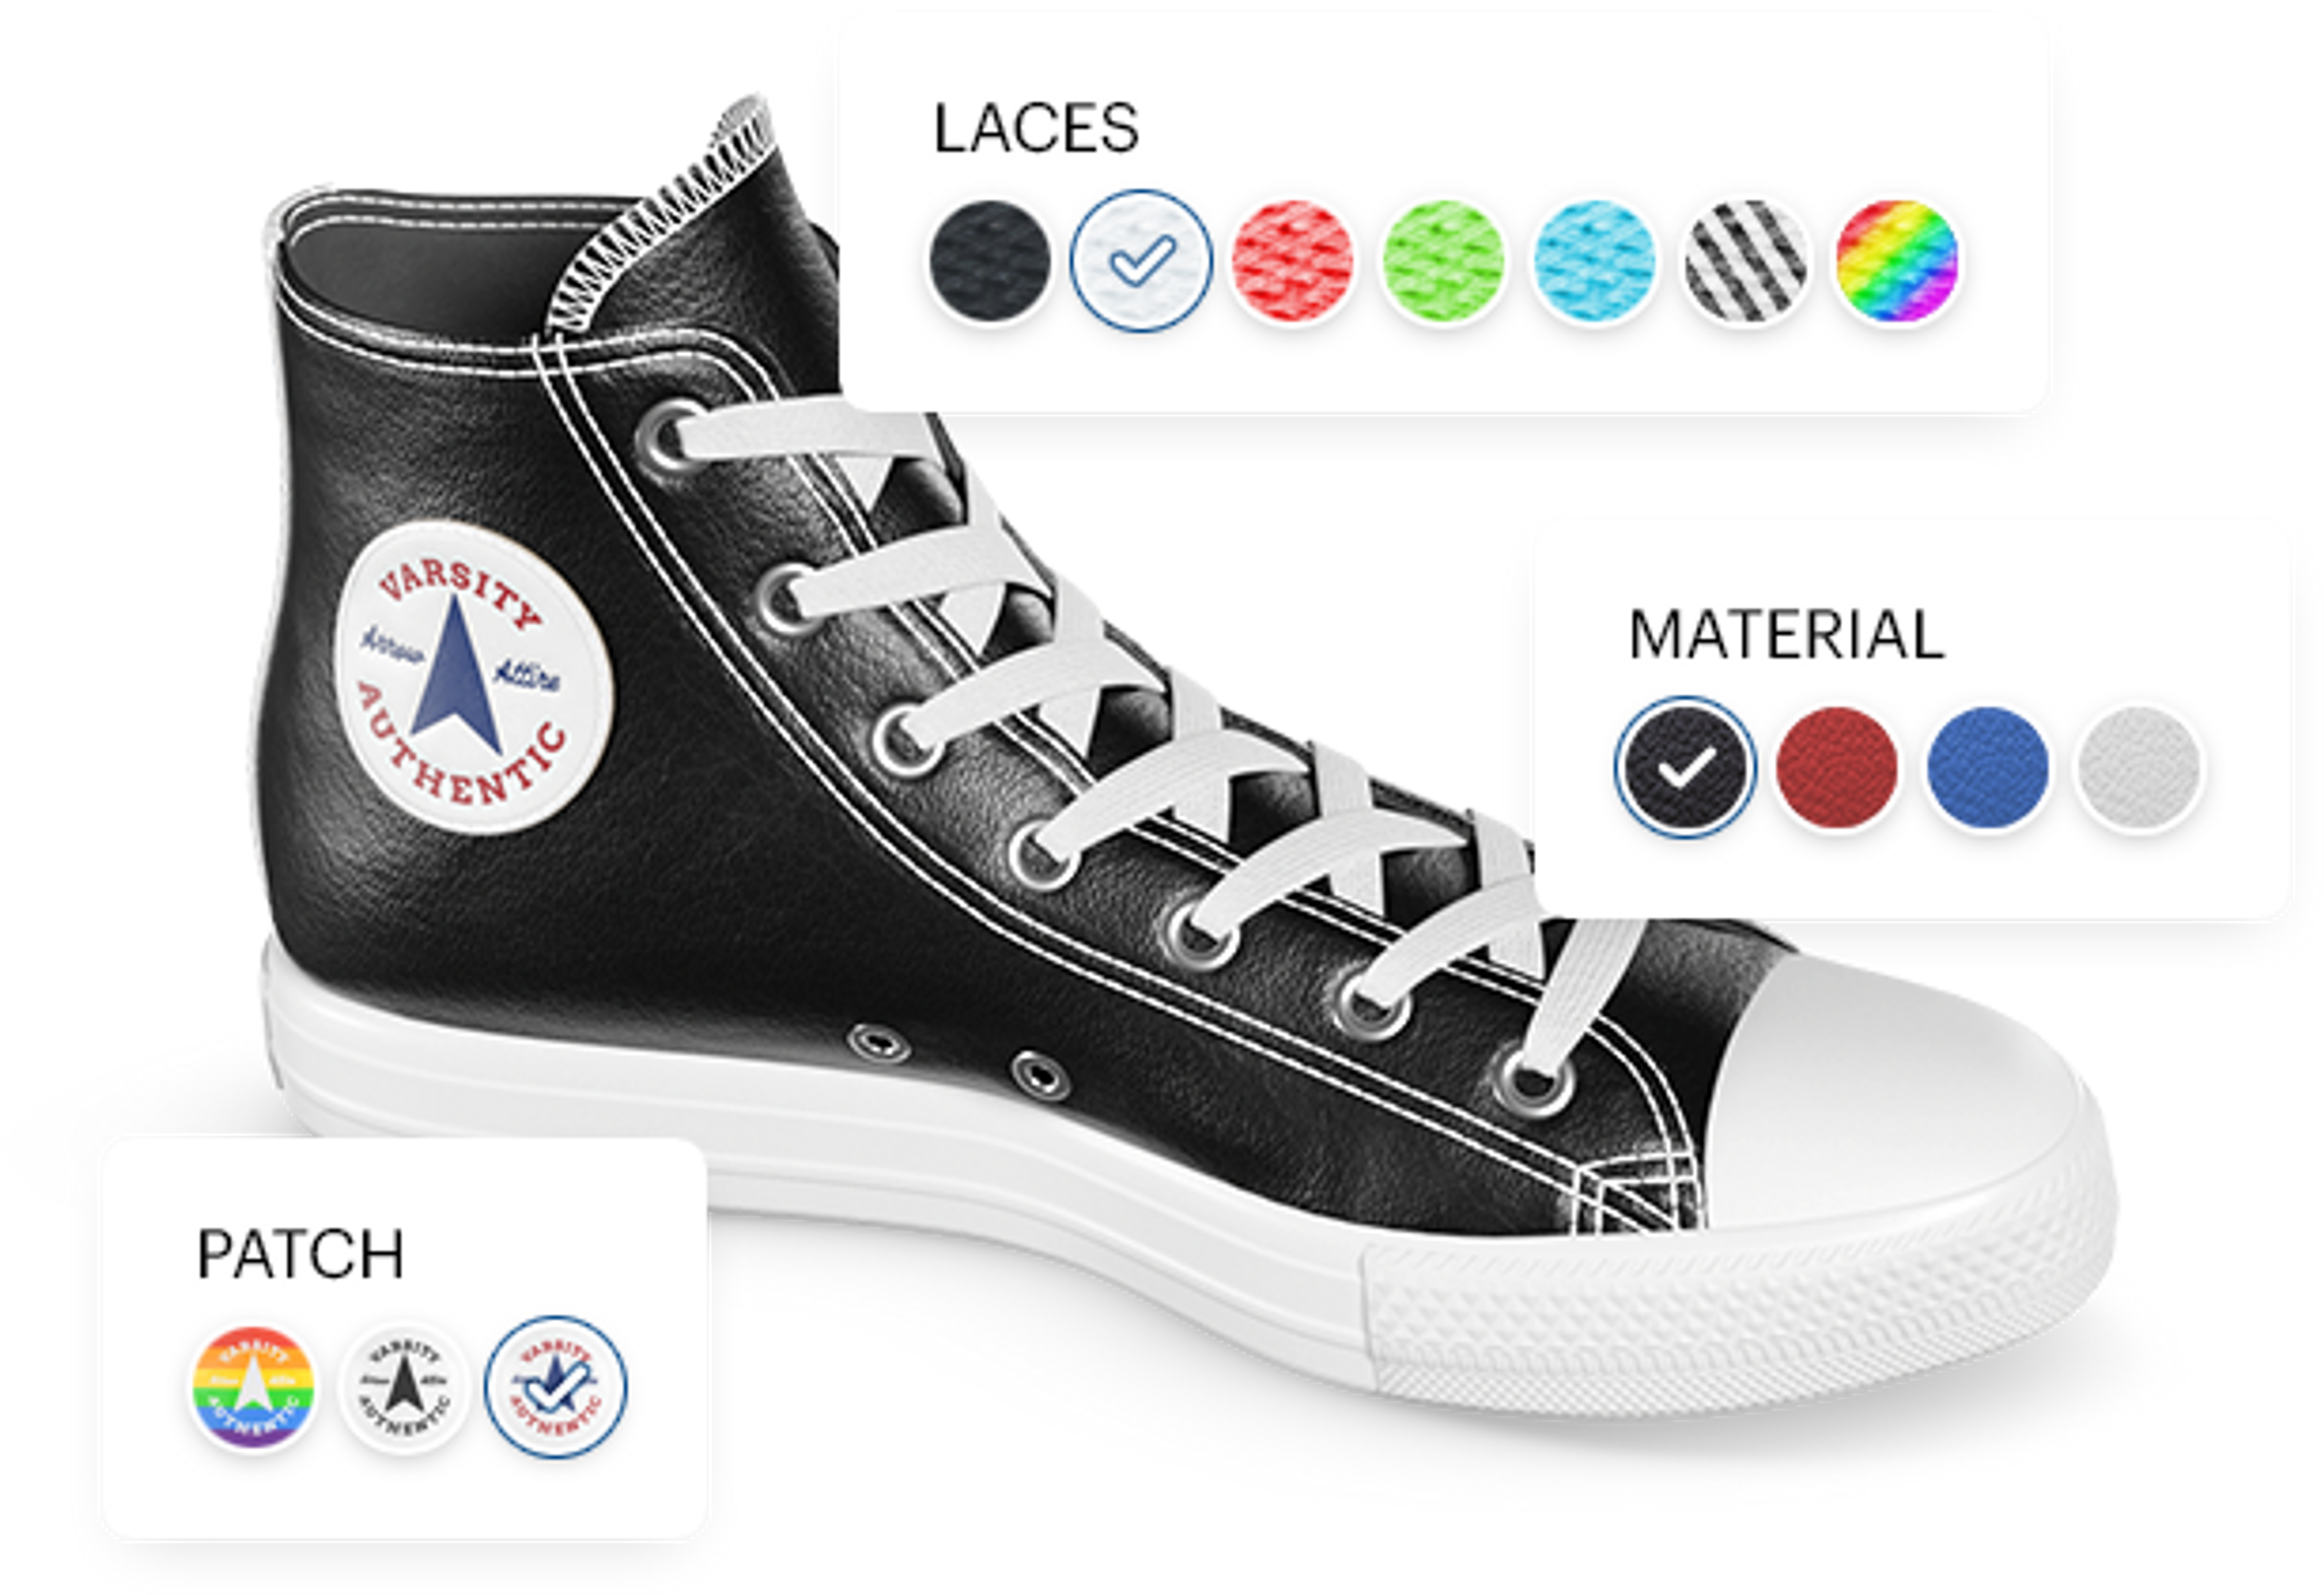 3D configurator interface on top of classic black sneaker shoe